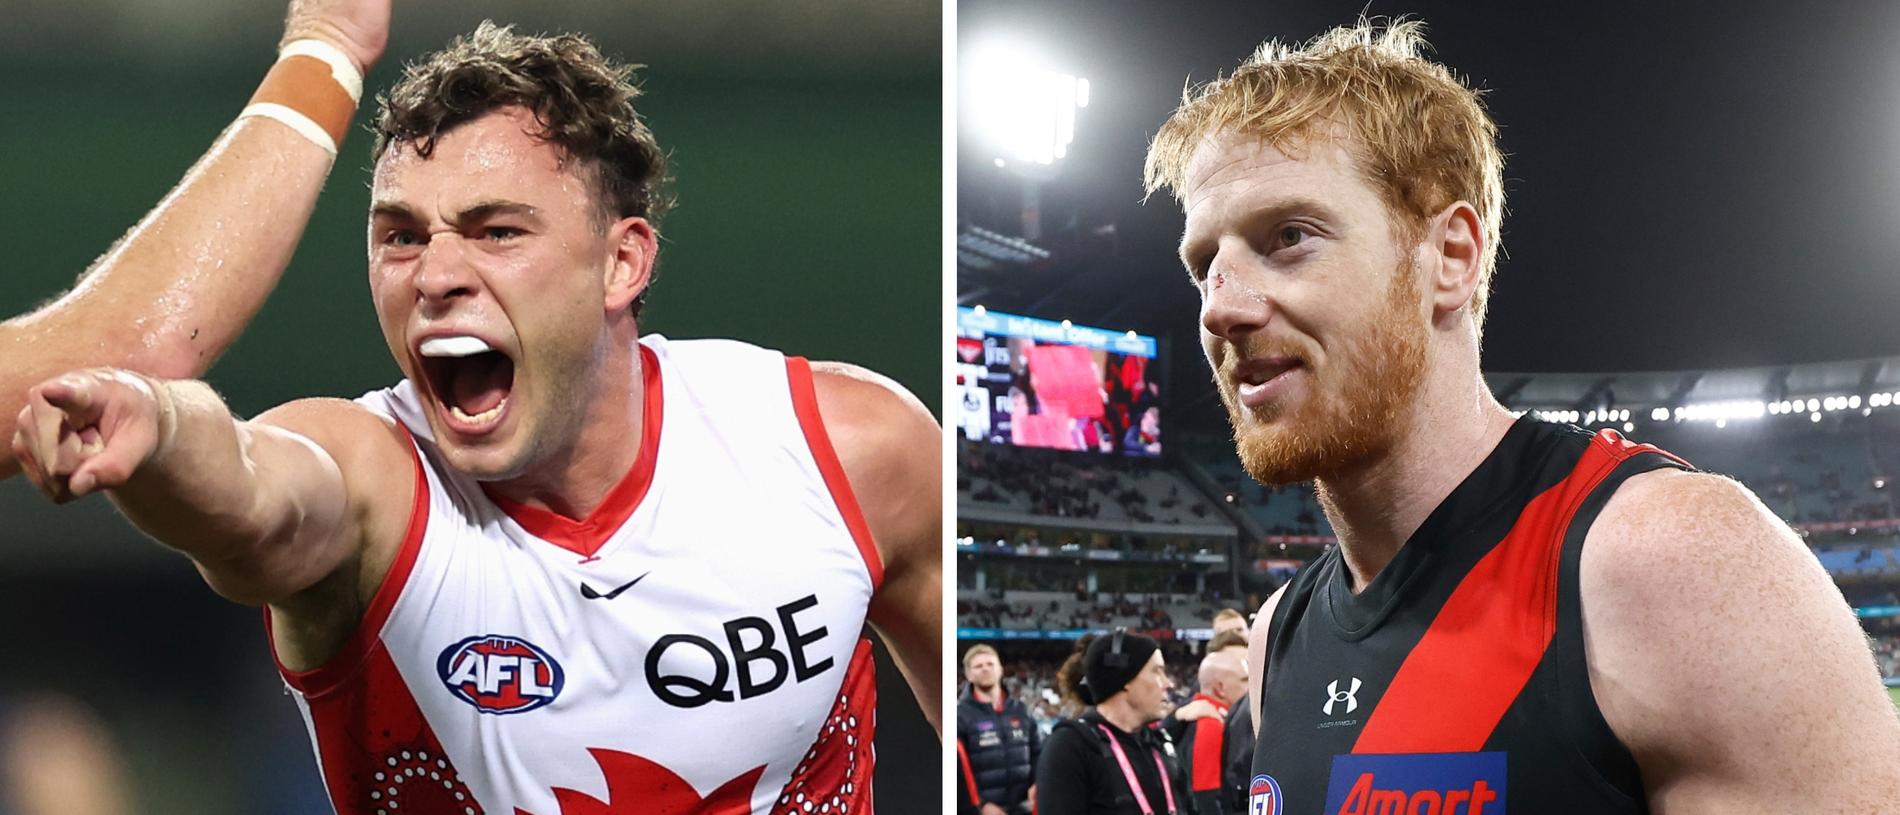 Will Hayward appears likely to shun rival interest, while former Essendon and Carlton ruckman Andrew Phillips has no desire to revive his AFL career.